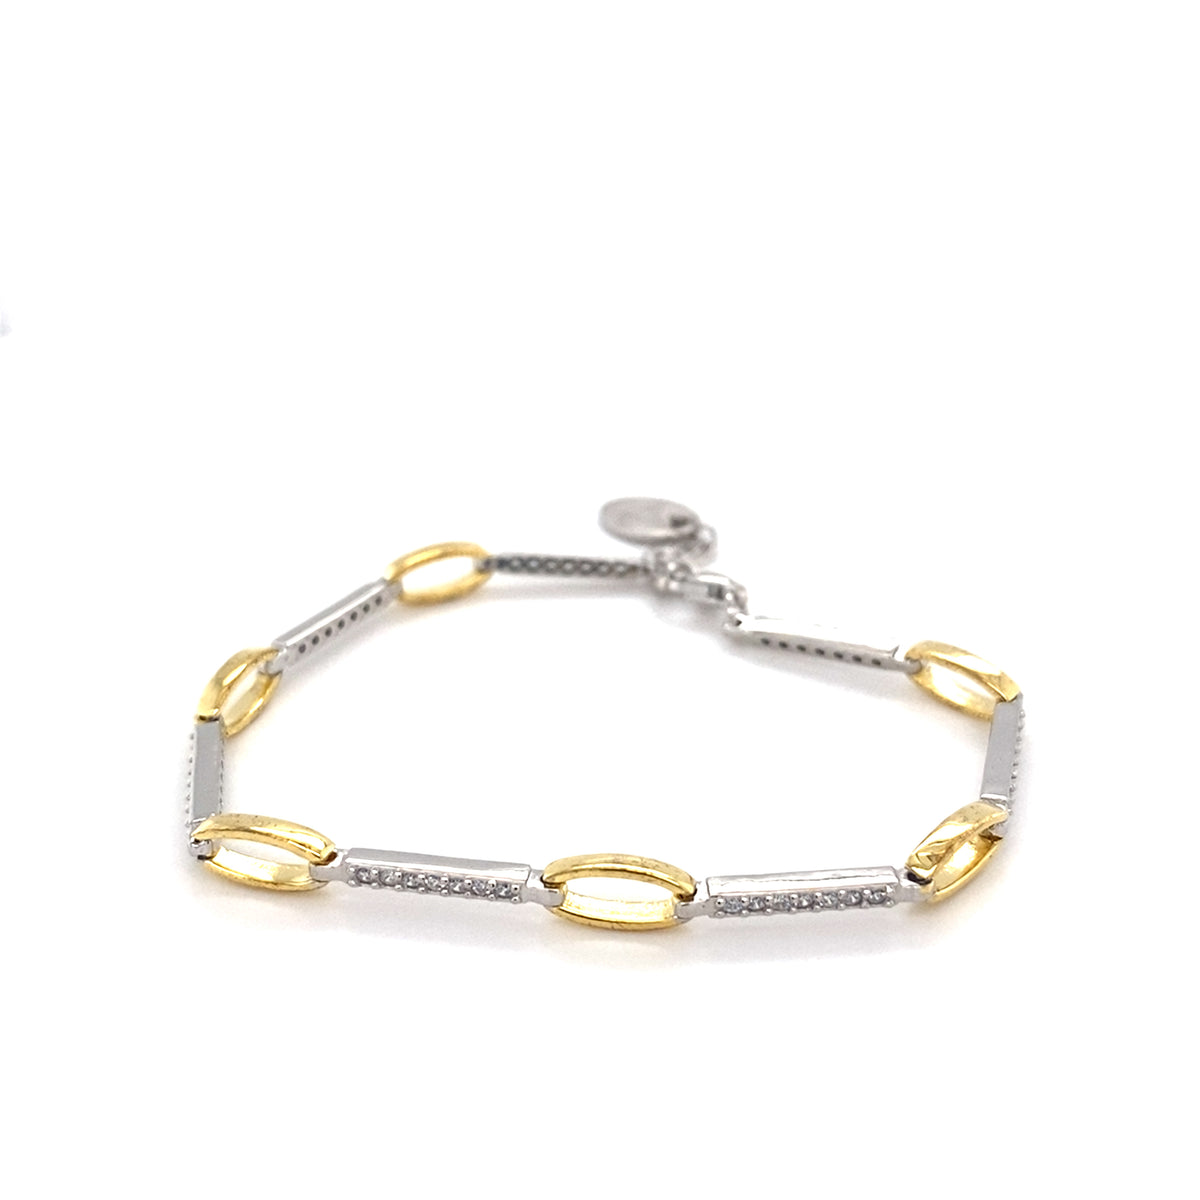 Sterling Silver Bracelet with Clear Stones and Gold Plated Links